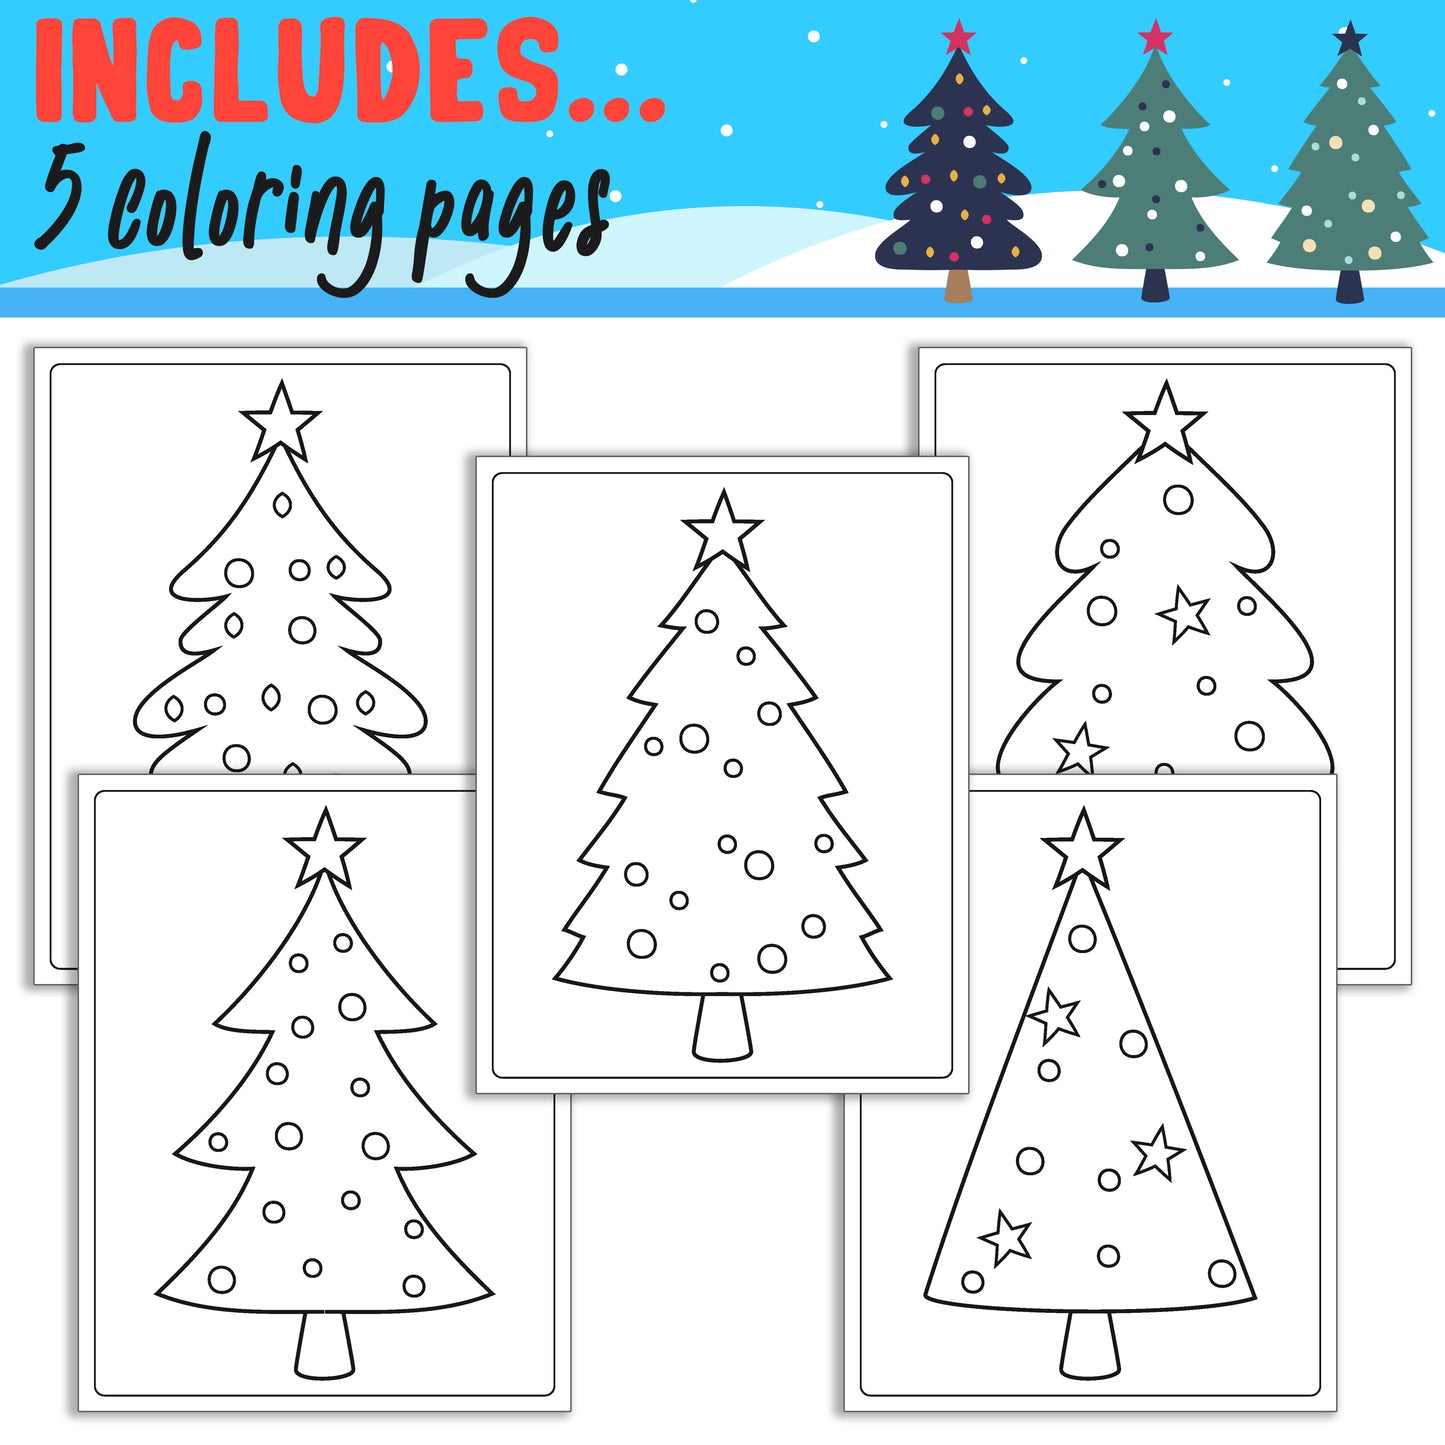 How To Draw a Christmas Tree, Directed Drawing Step by Step Tutorial, Includes 5 Coloring Pages, PDF File, Instant Download